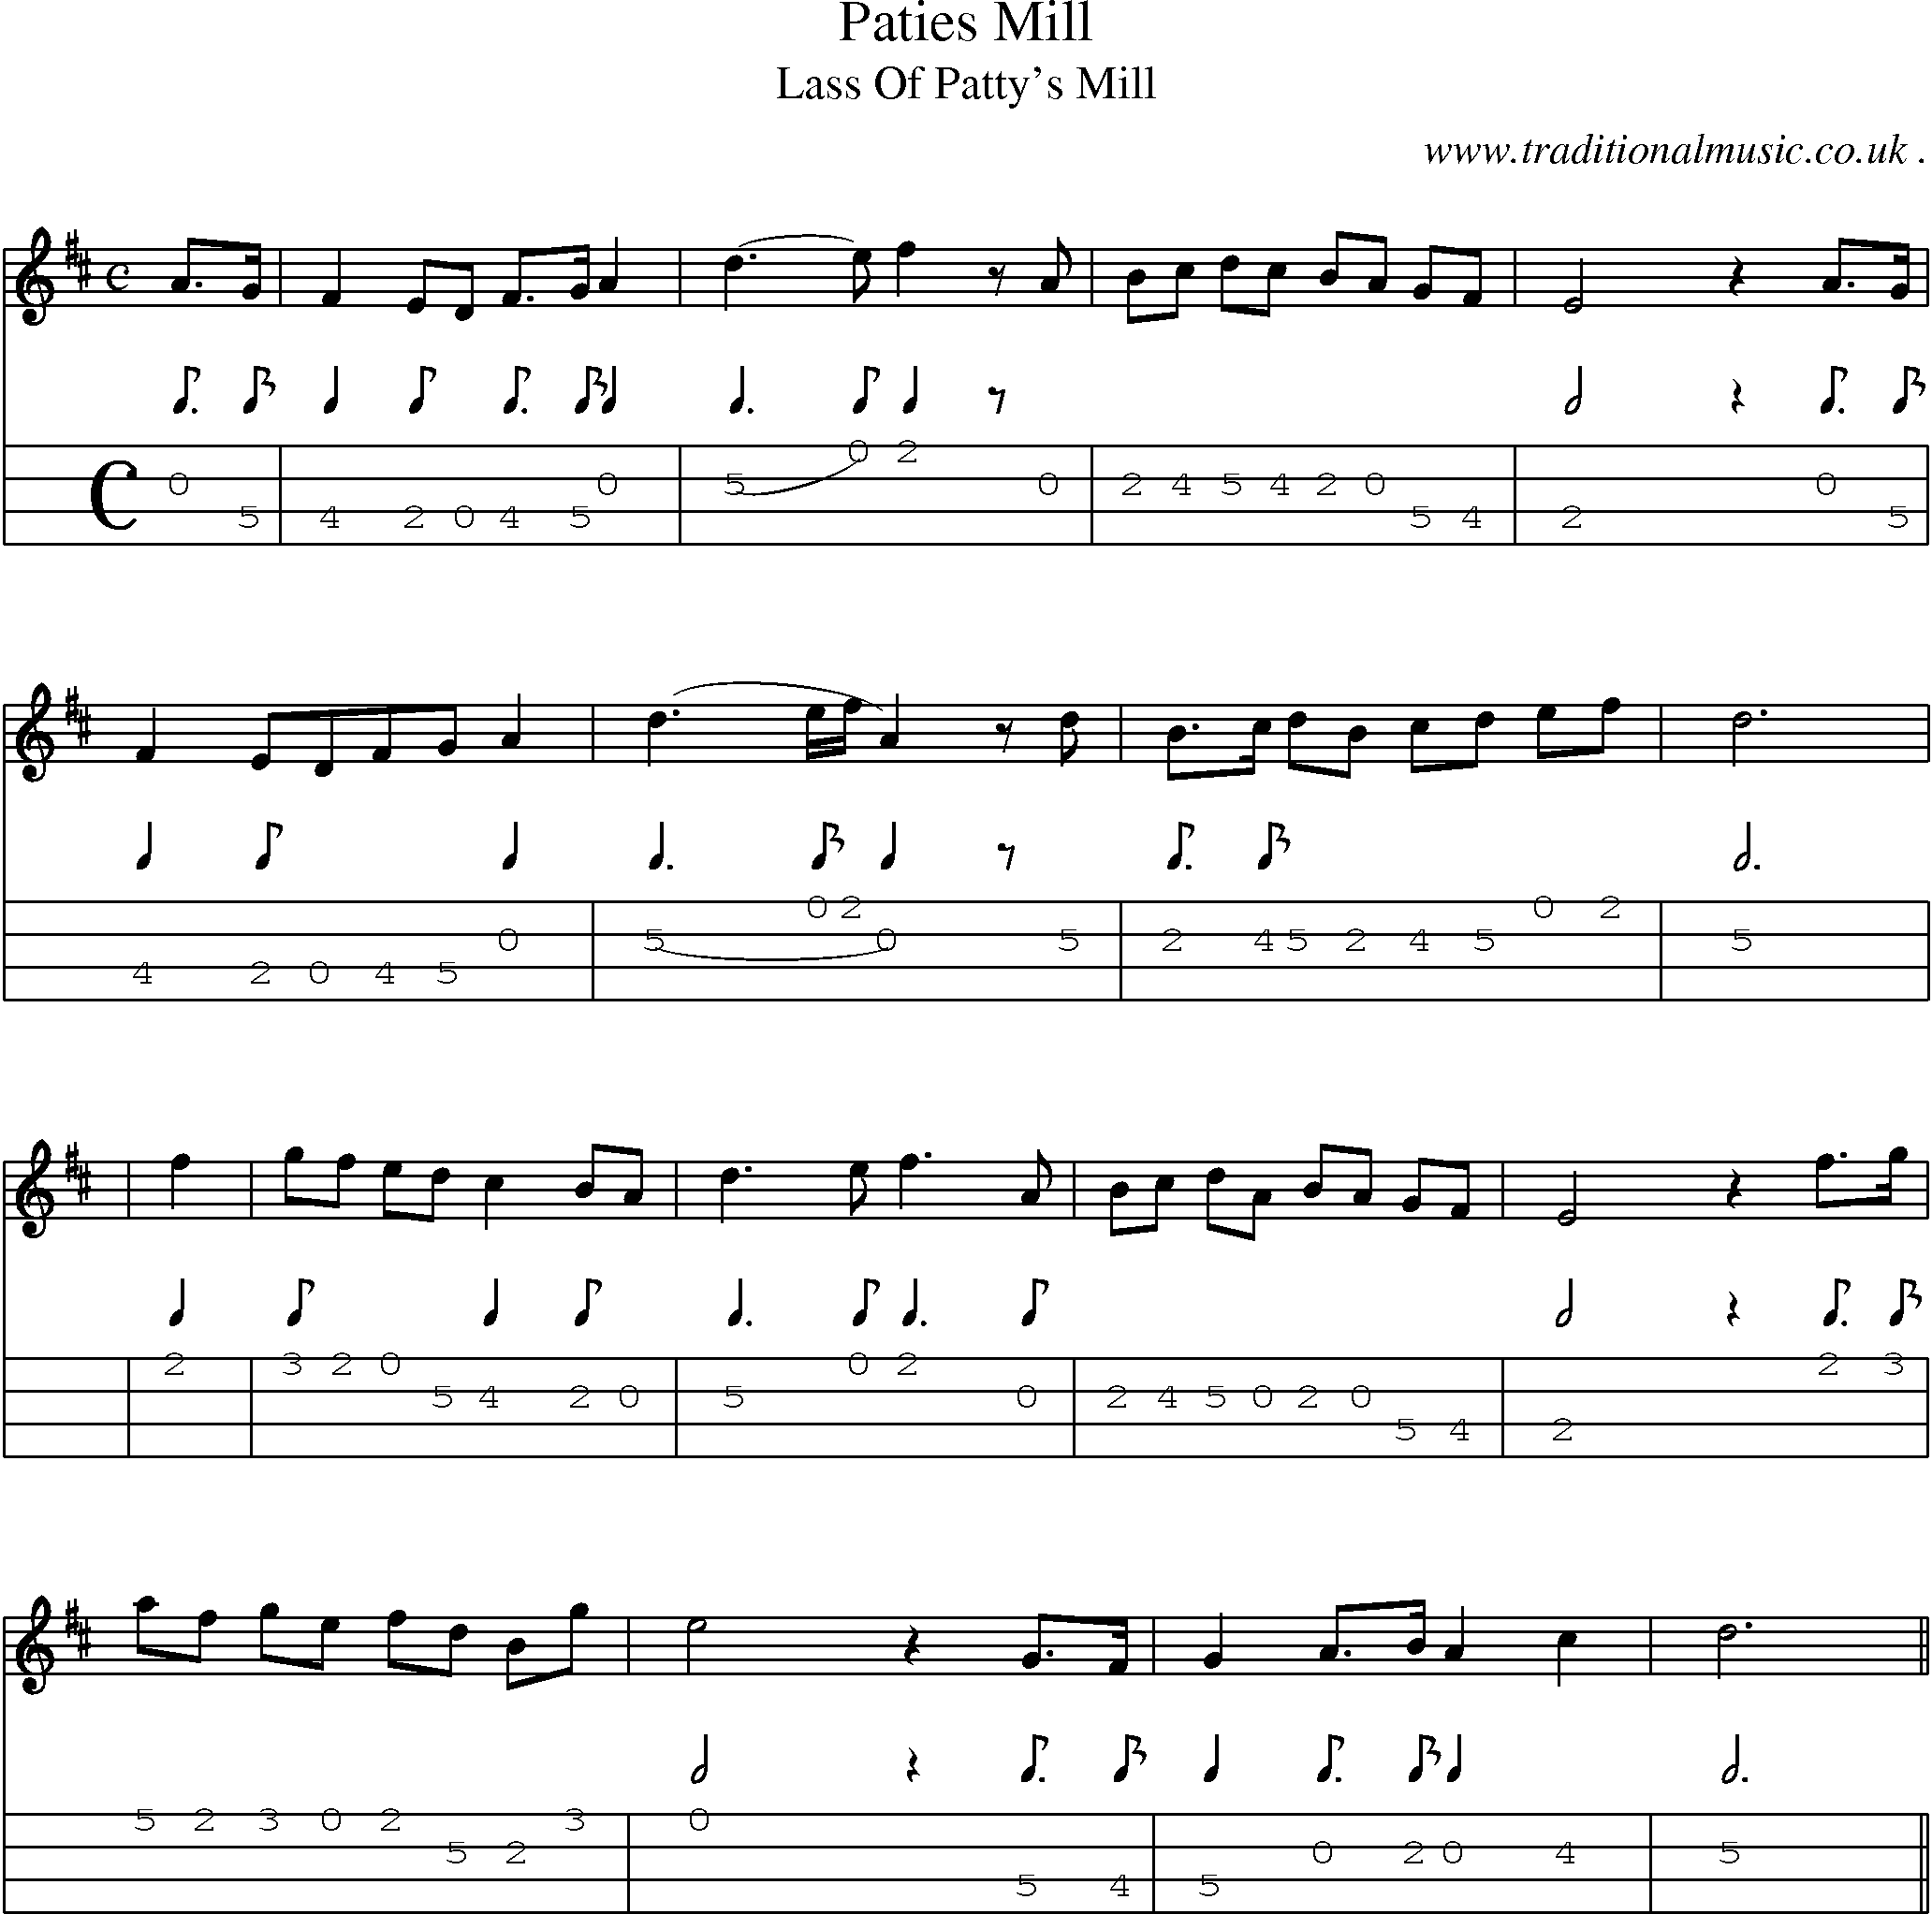 Sheet-Music and Mandolin Tabs for Paties Mill